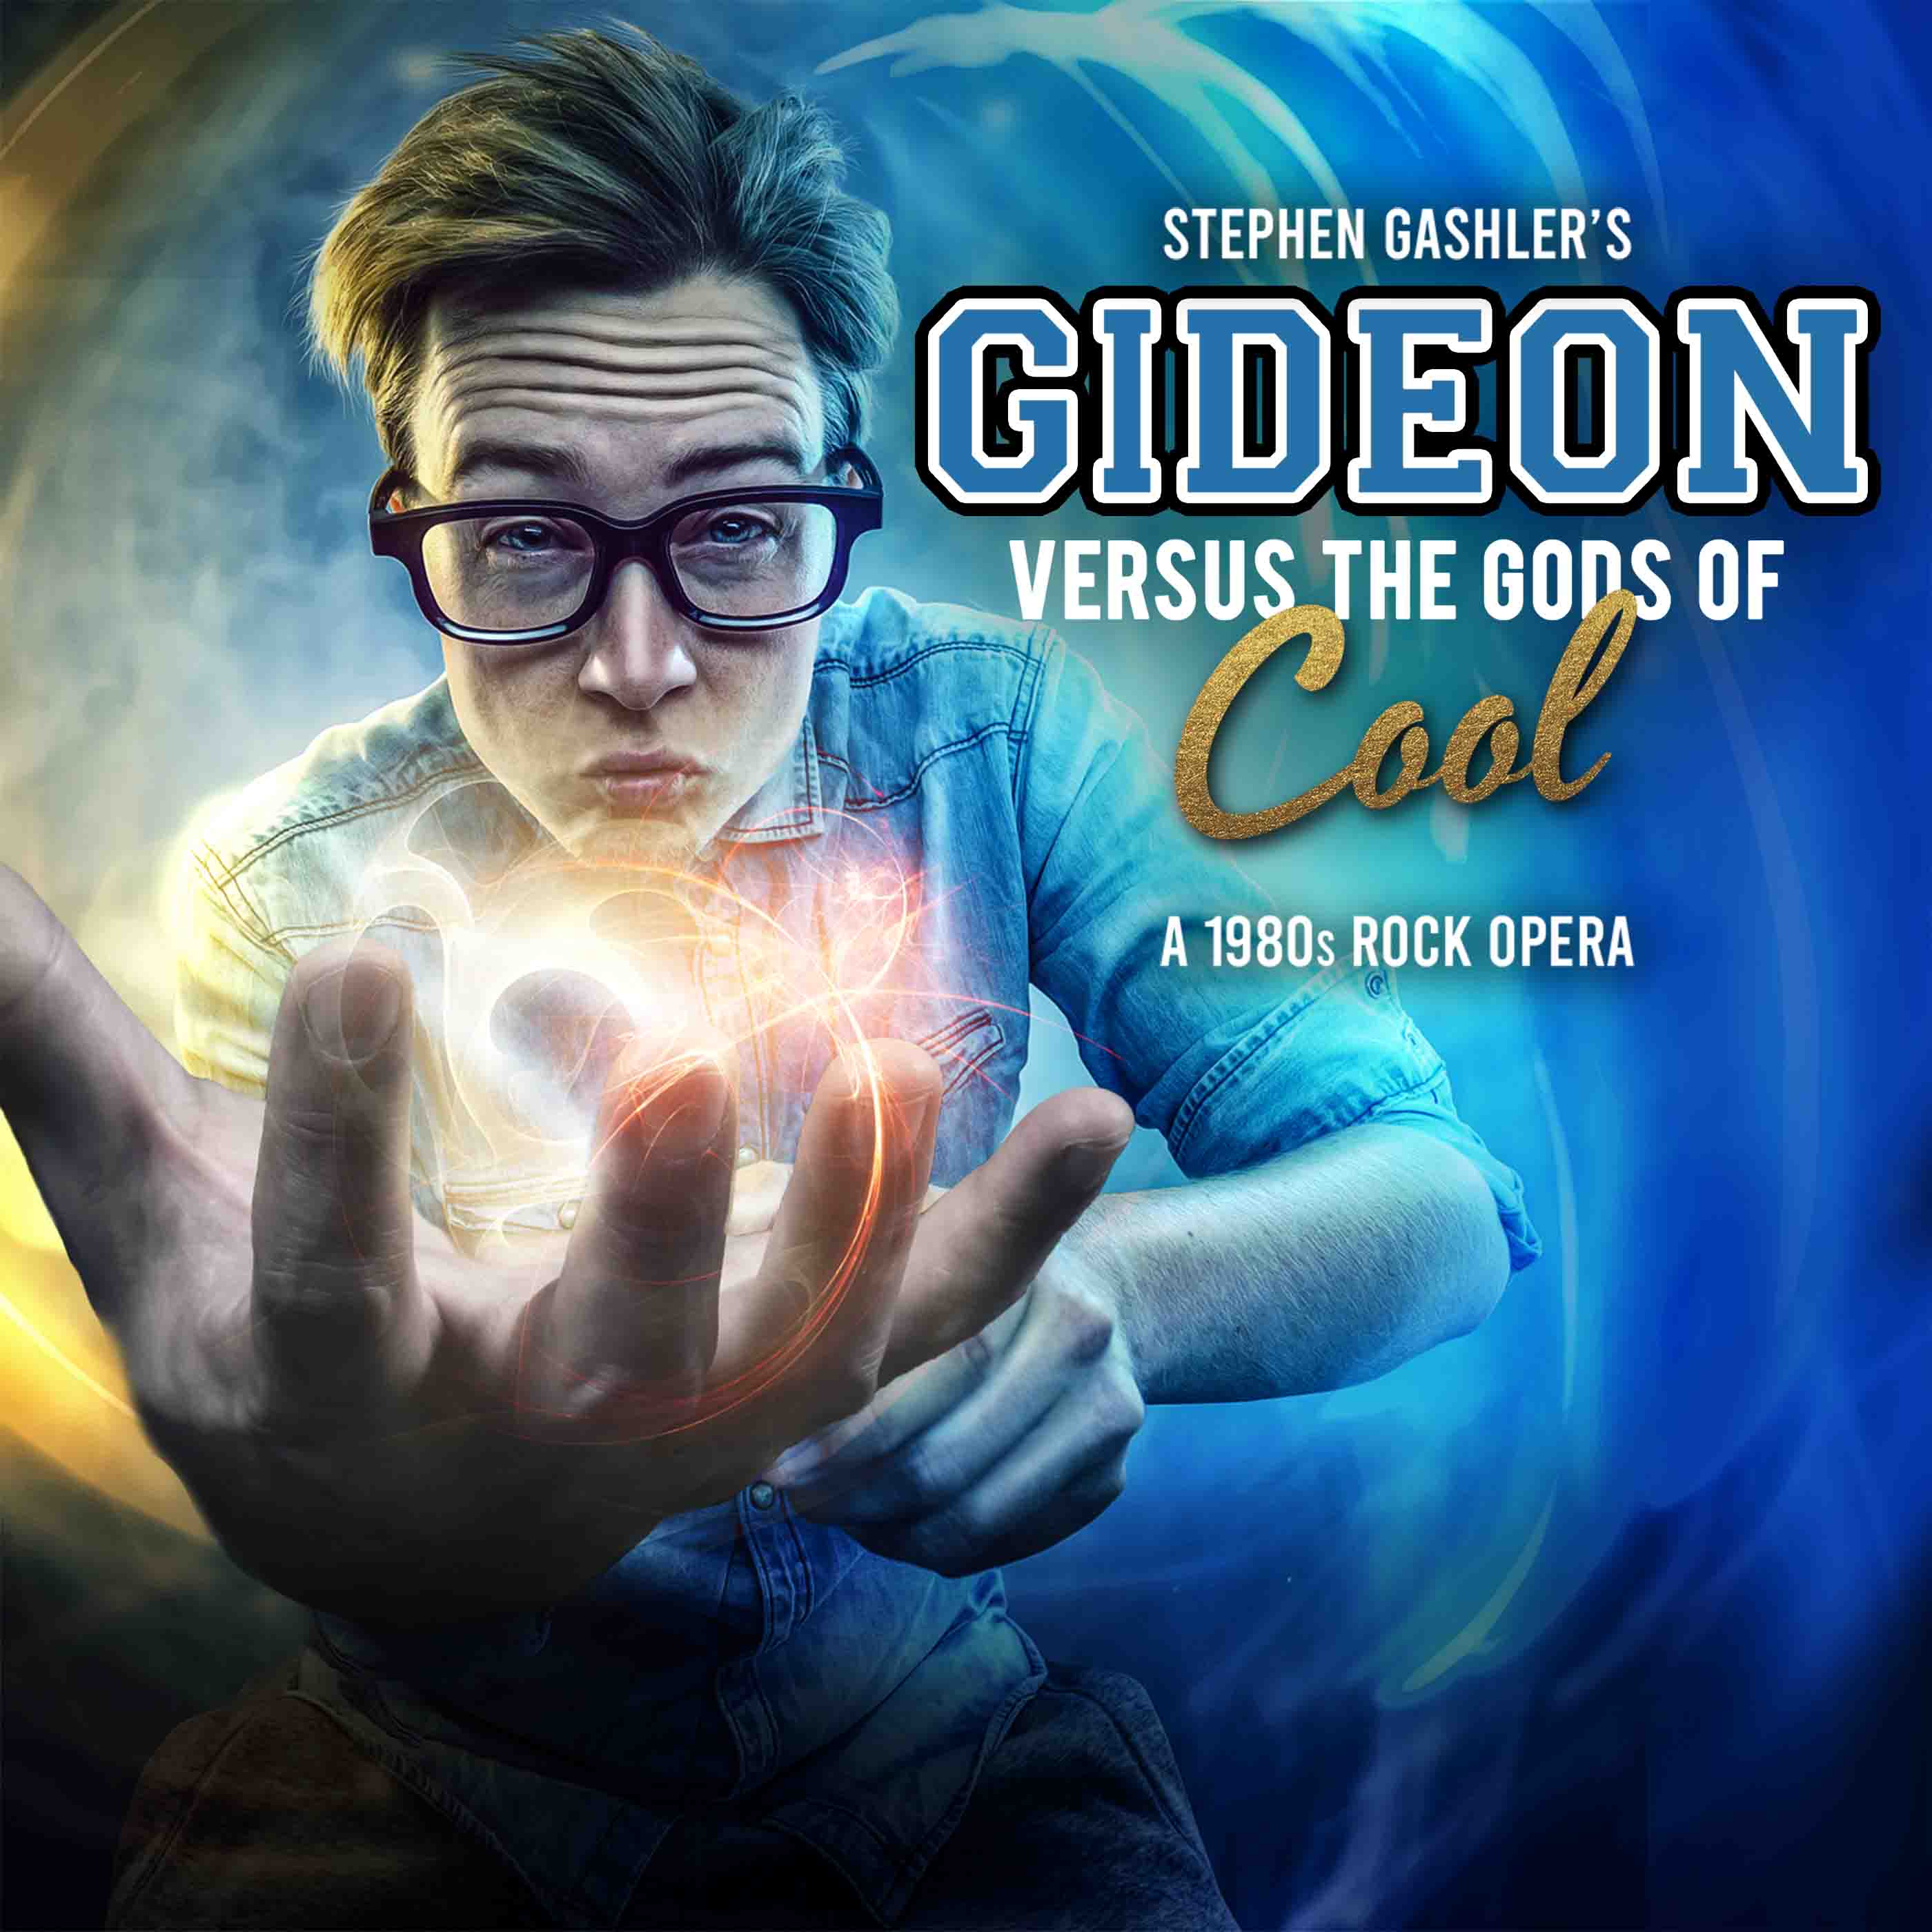 Gideon Vs. the Gods of Cool undefined